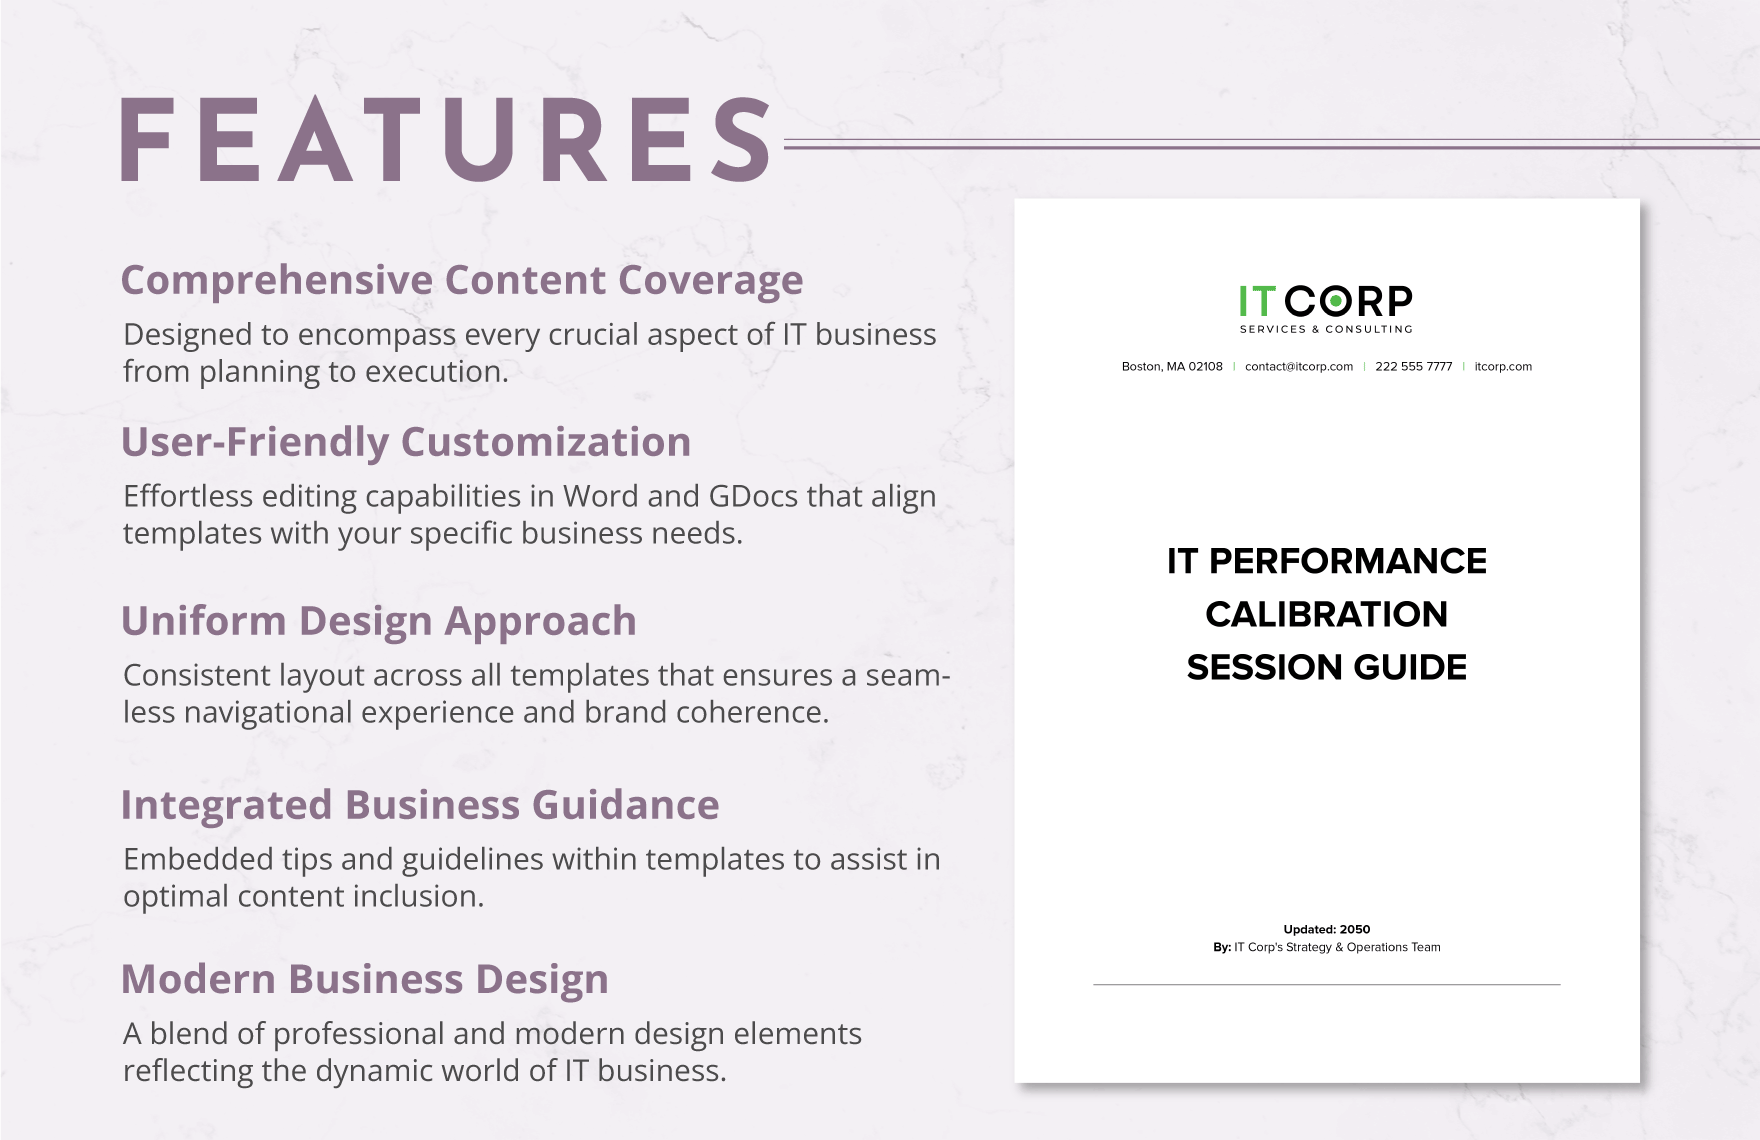 IT Performance Calibration Session Guide Template